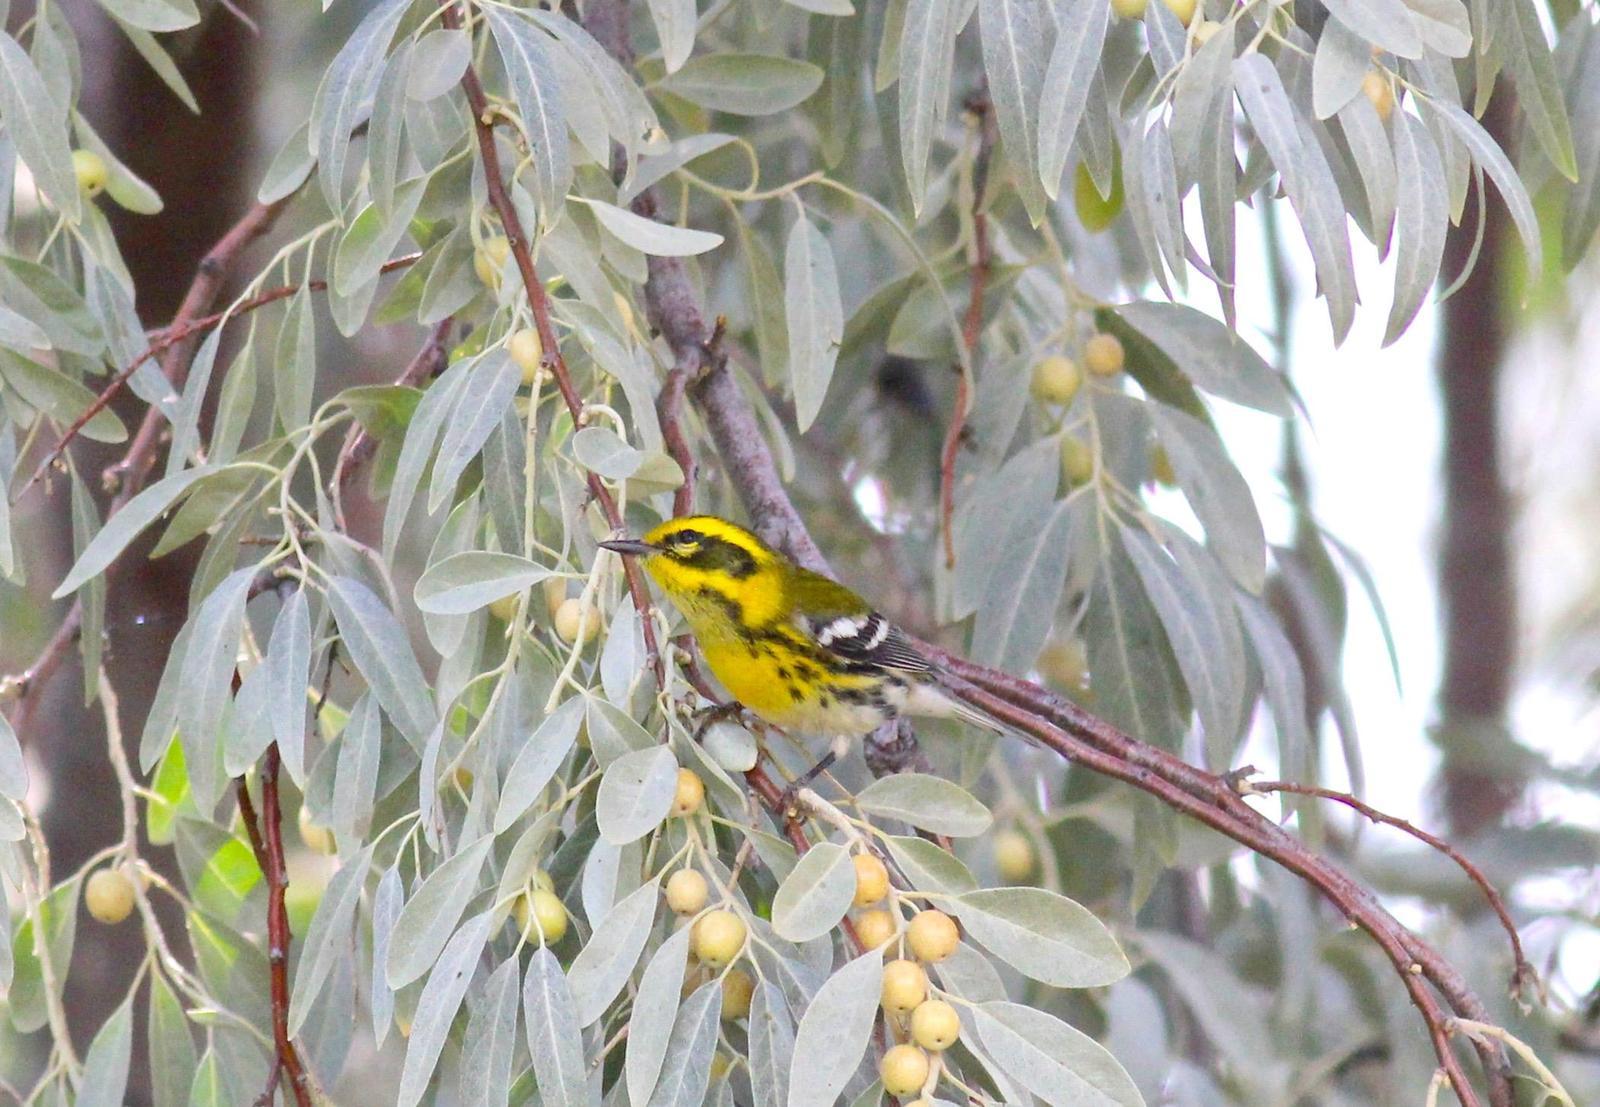 Townsend's Warbler Photo by Kathryn Keith